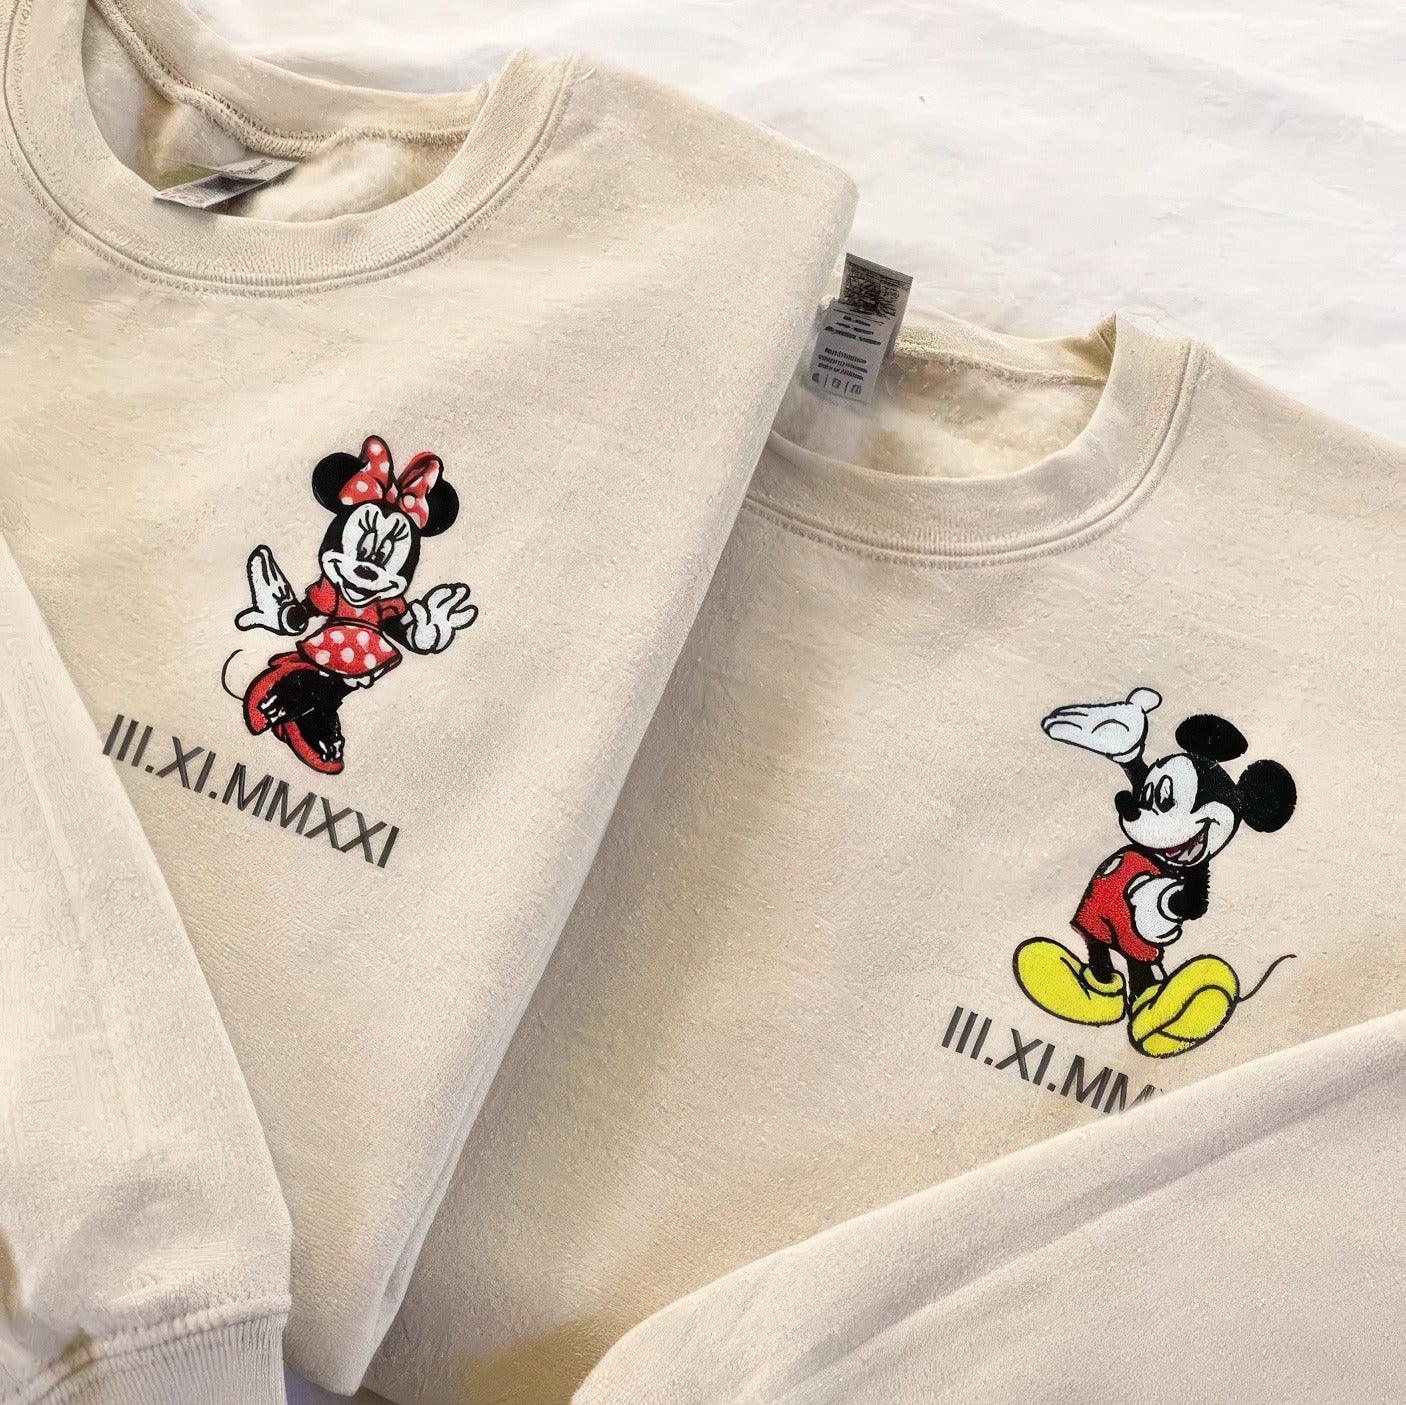 Custom Embroidered Sweatshirts For Couples, Family Matching Sweatshirt, Cute Mouse Couples Embroidered Sweatshirt